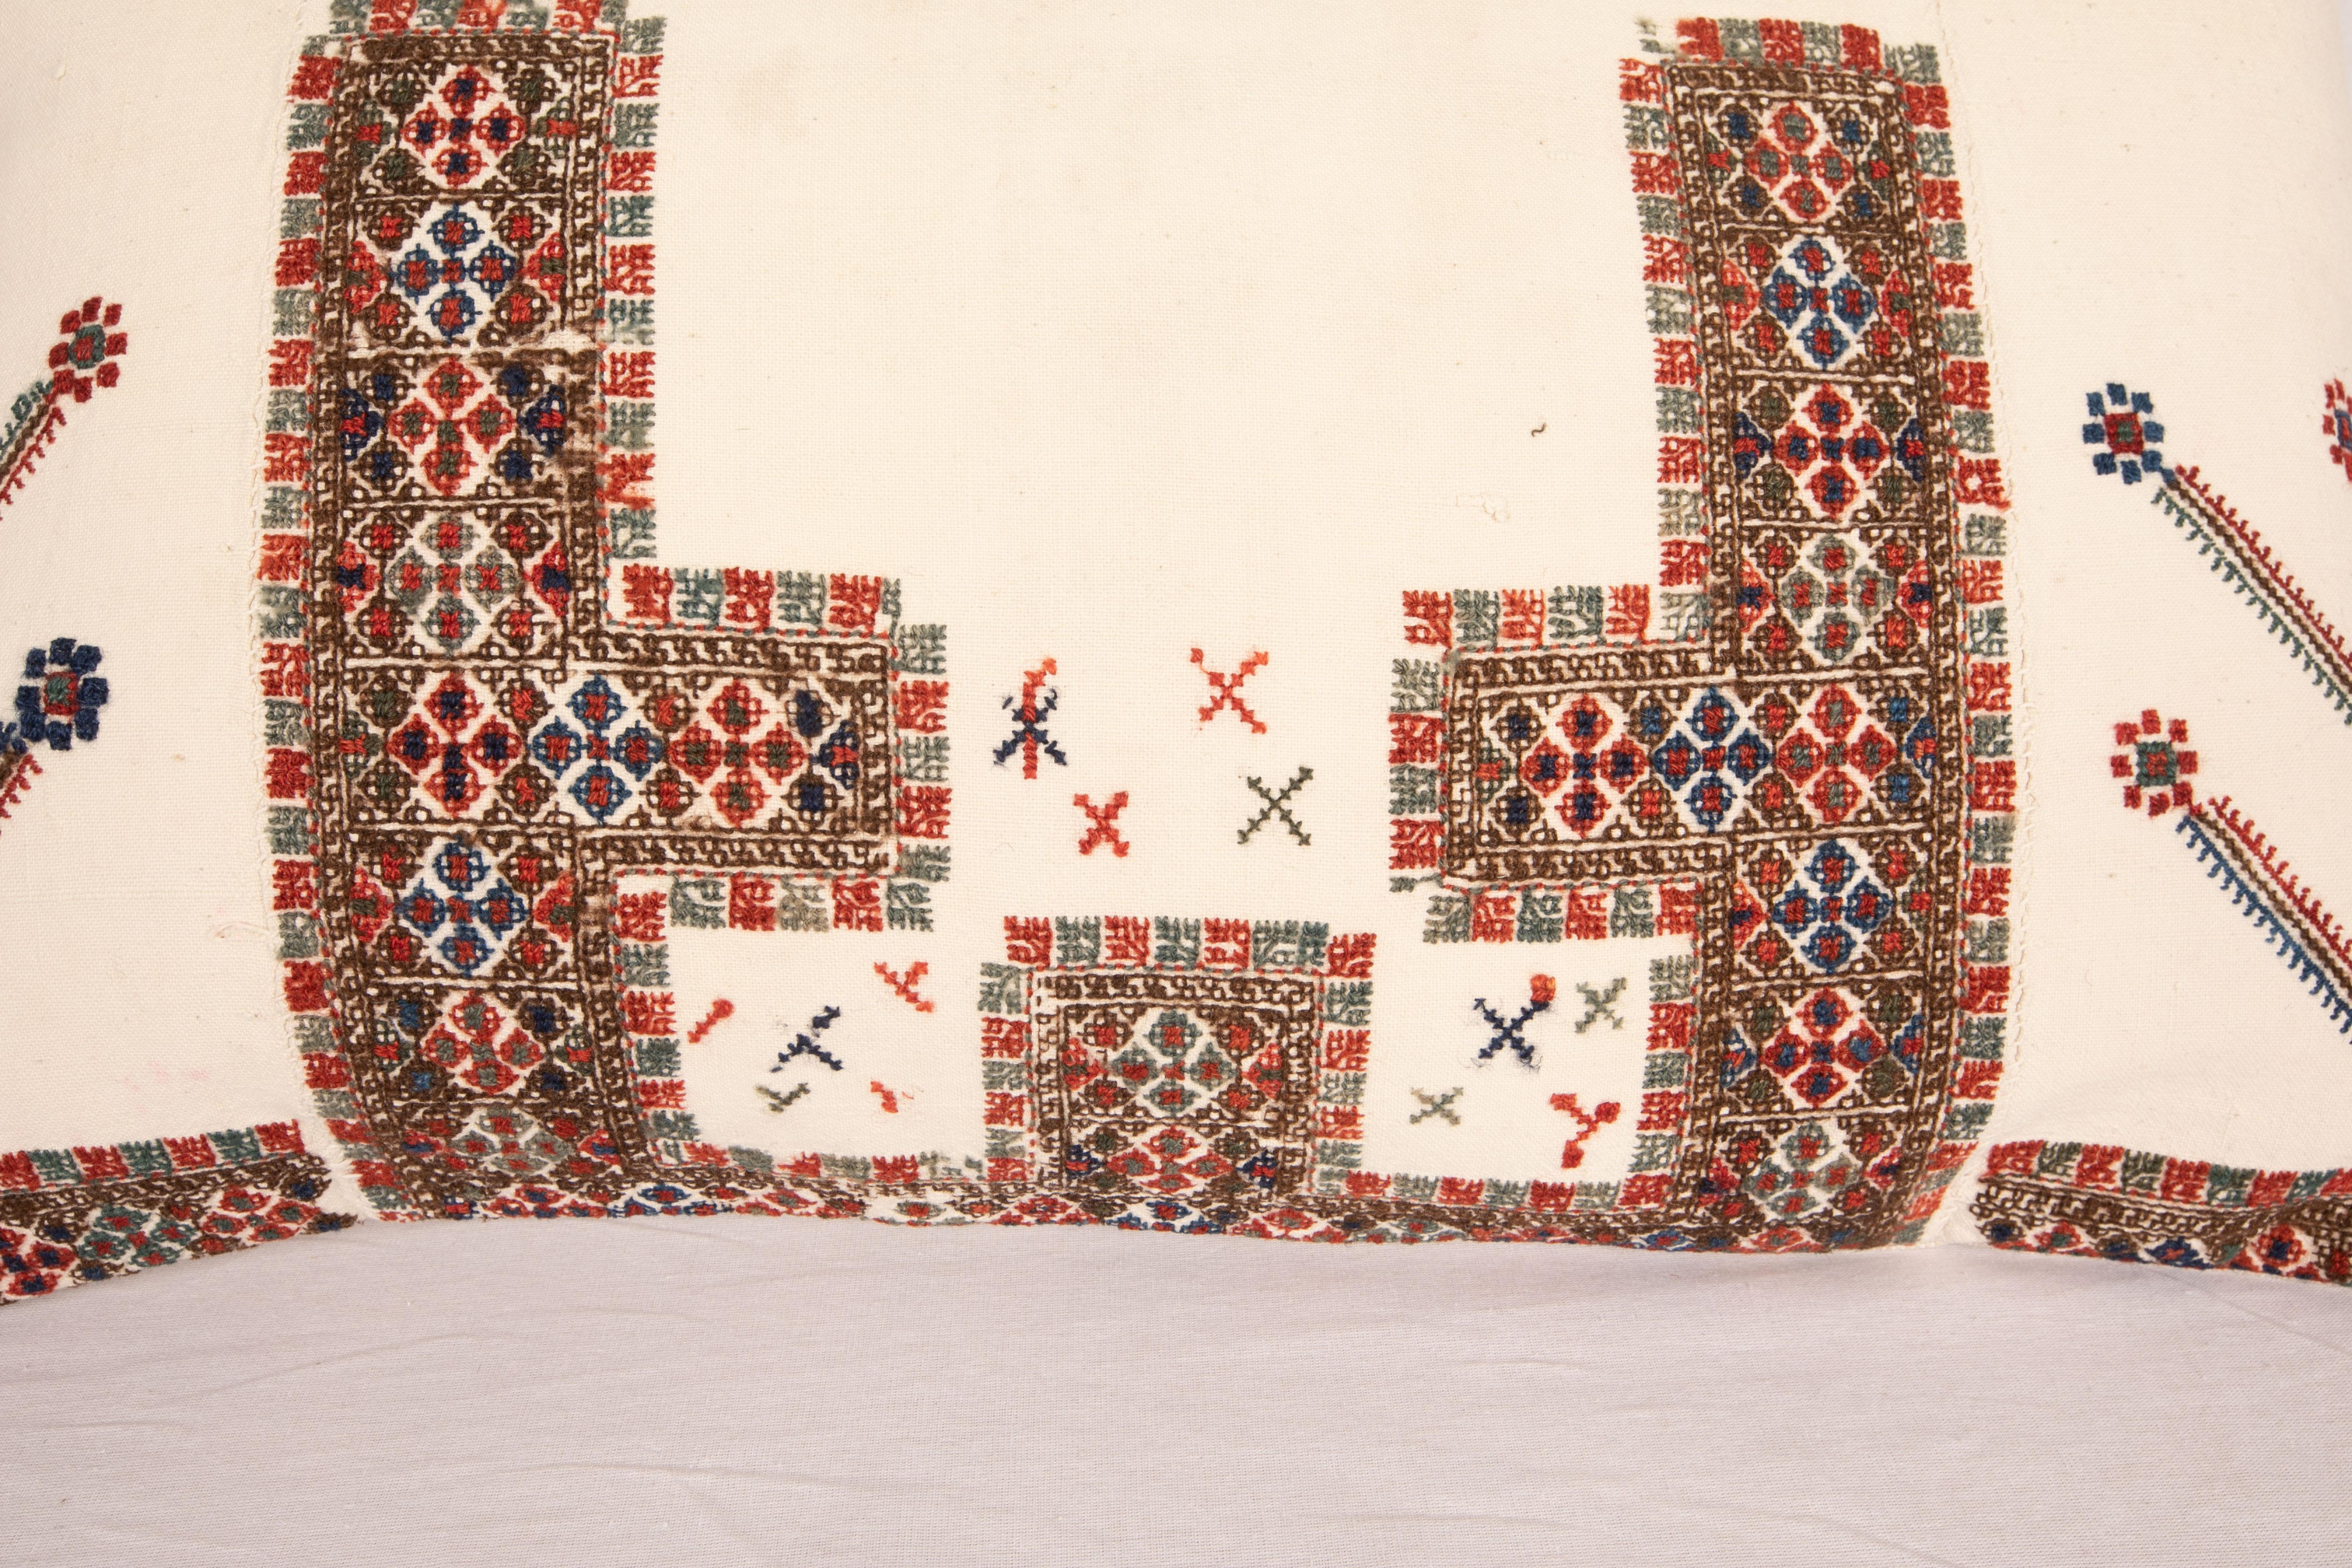 Embroidered Antique Pillow Cover Made from an Eastern European Dress Front, Early 20th C